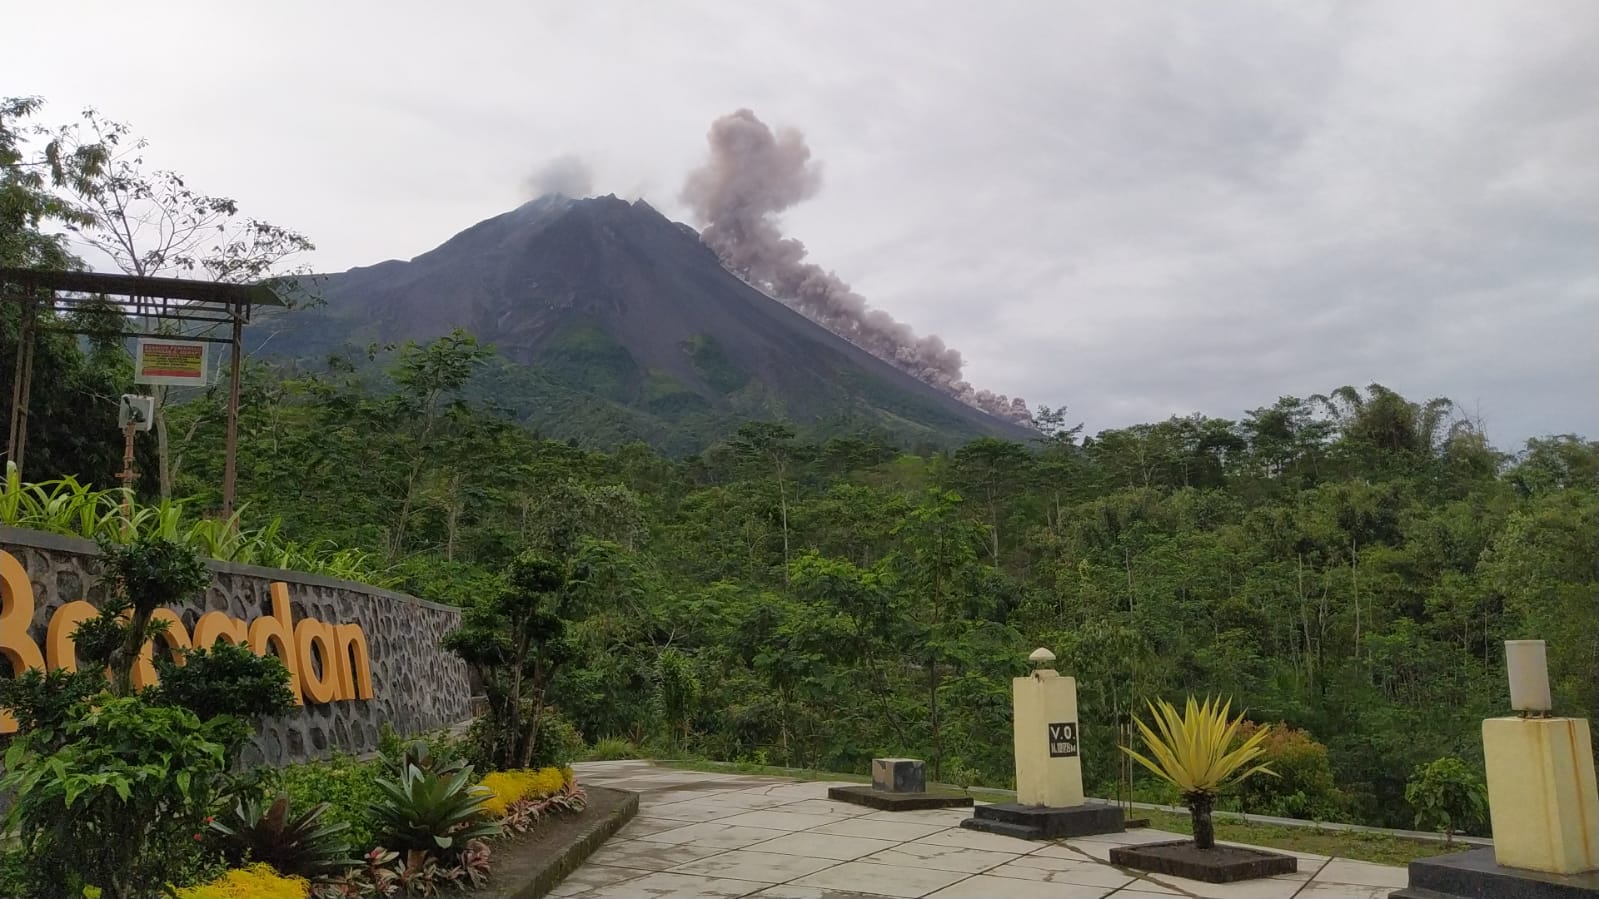 Pyroclastic flow and phoenix clouds at Merapi volcano this morning (image: PVMBG)